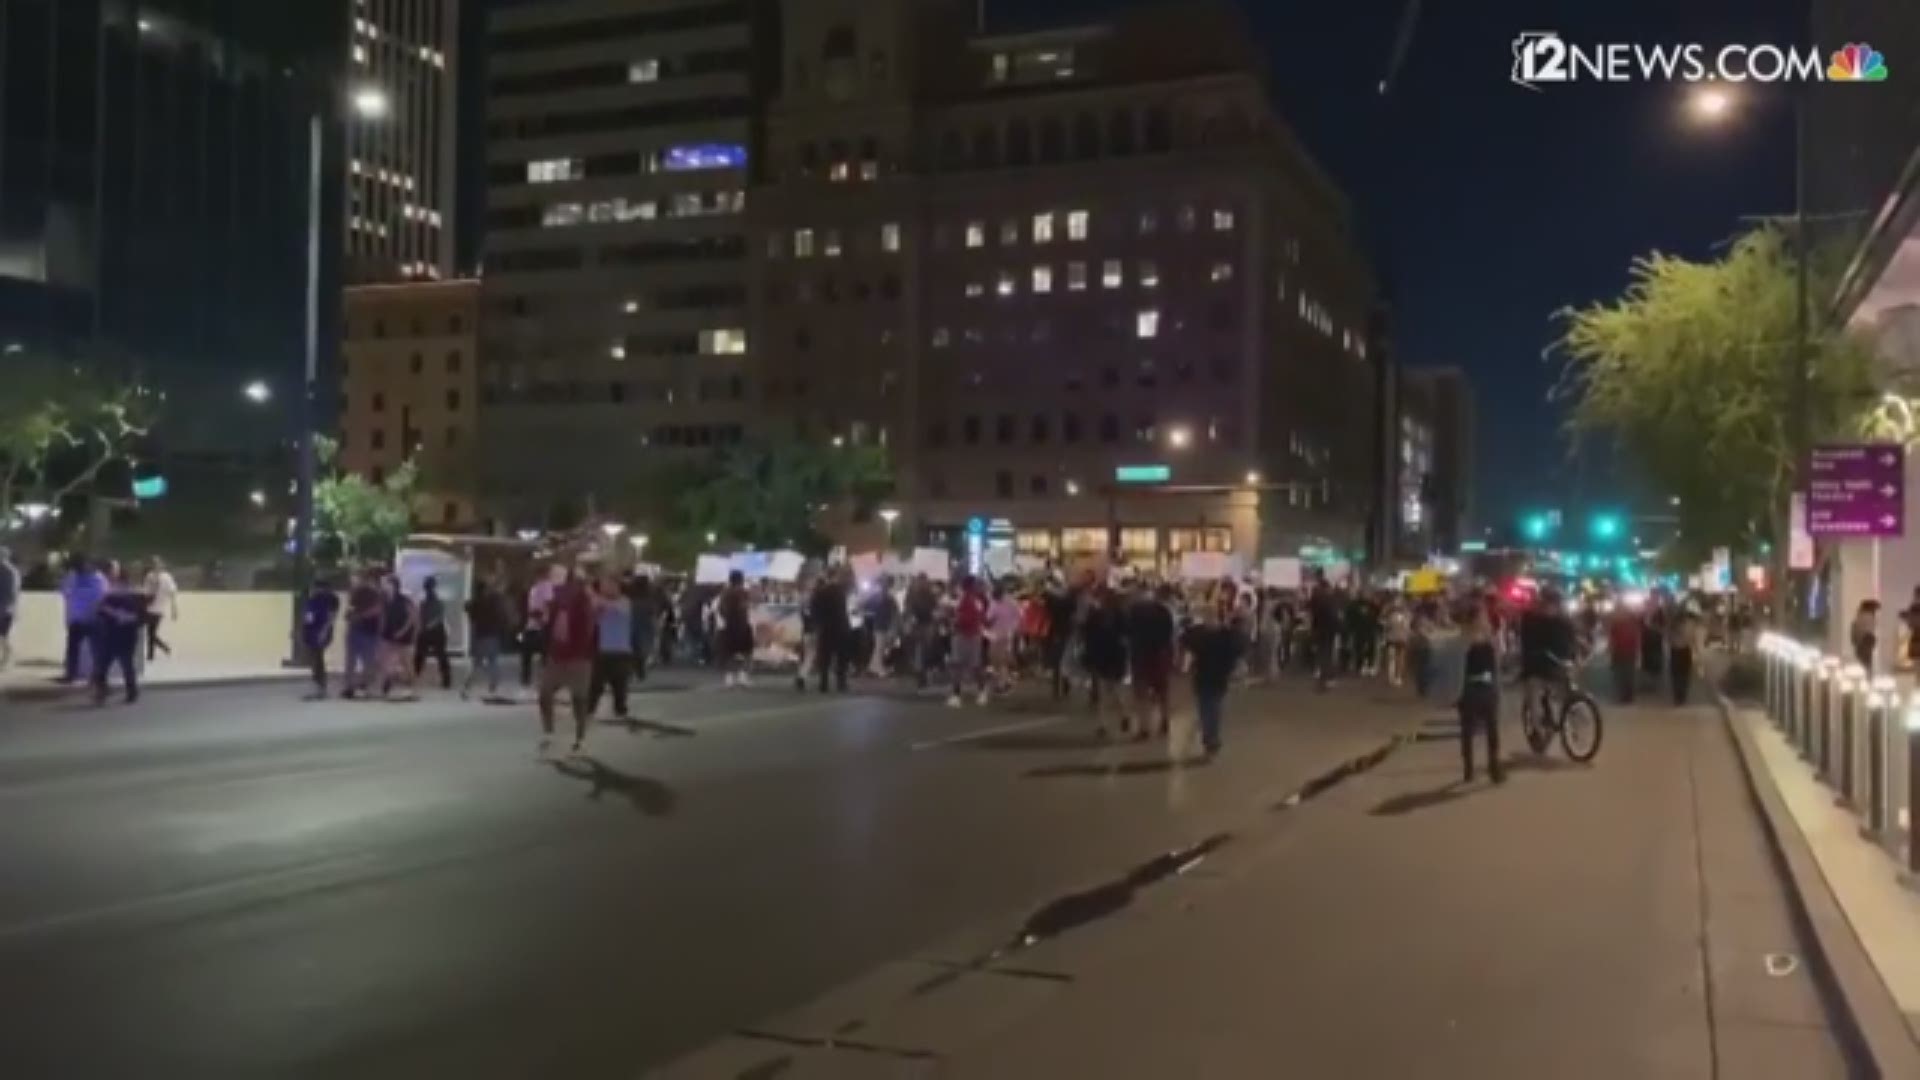 12 News' Josh Sanders captured video of the peaceful march in downtown Phoenix. People chanted “No justice, no peace.”